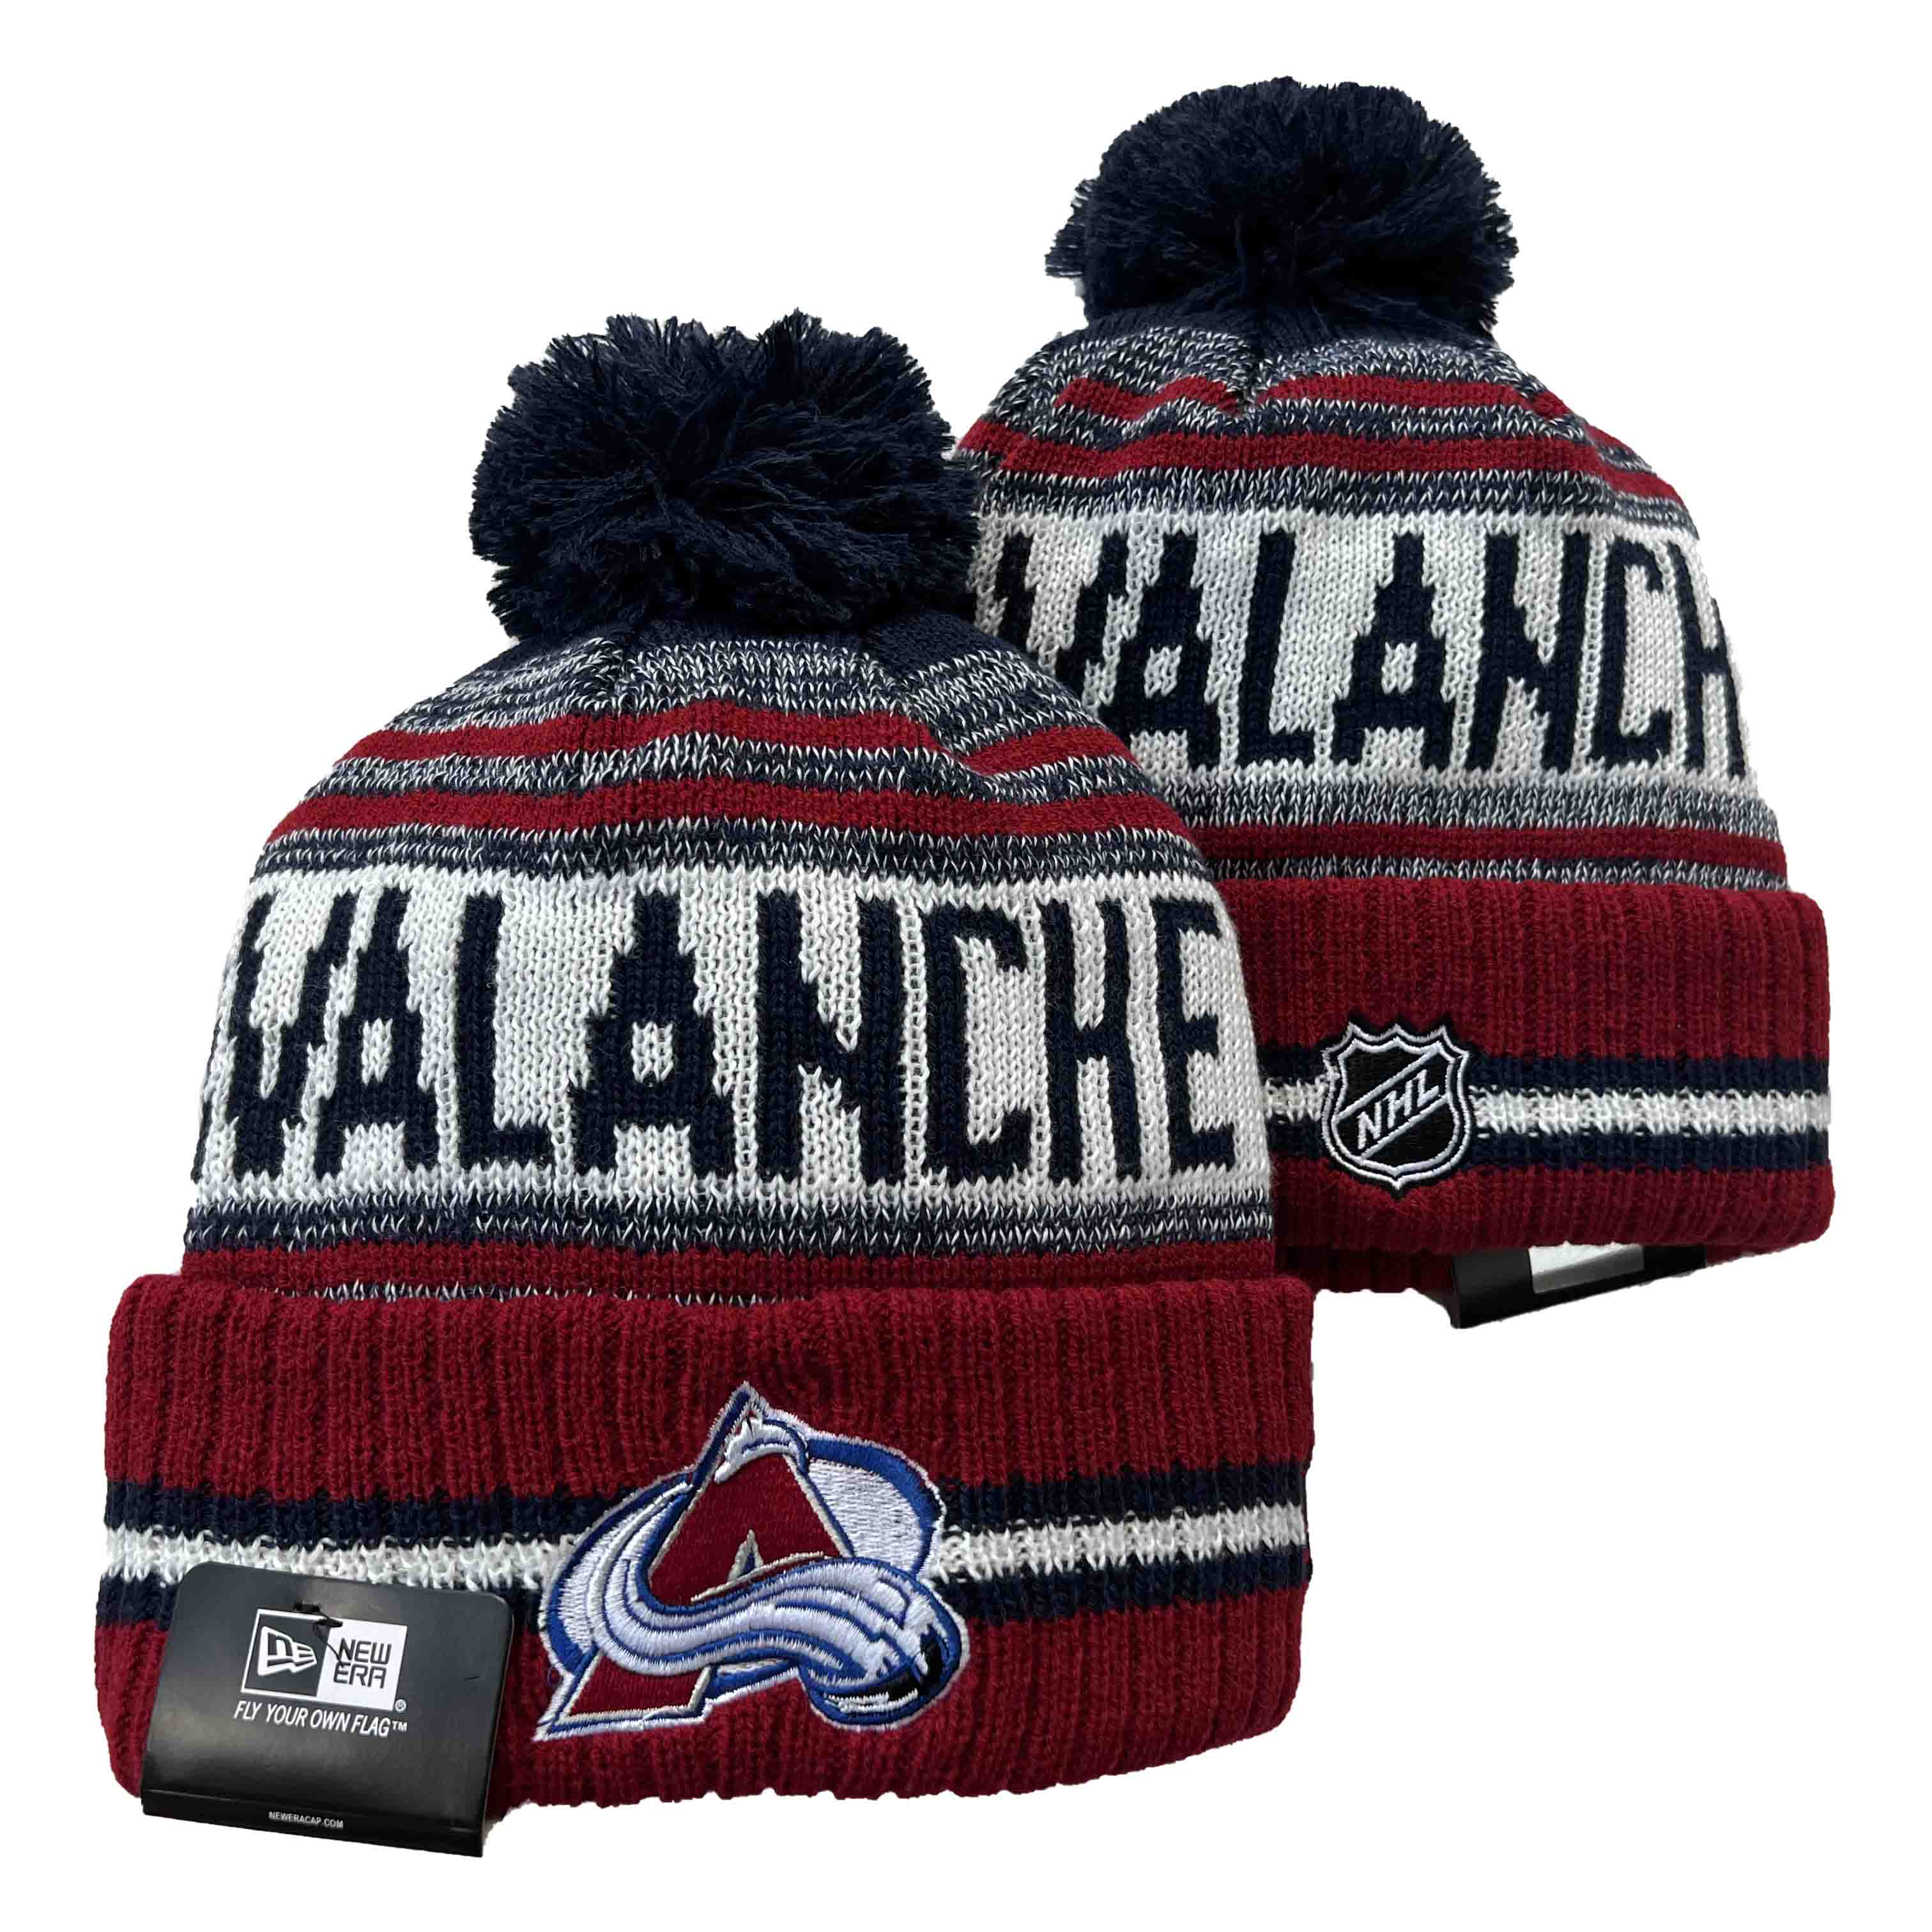 NHL Colorado Avalanche Beanies Knit Hats-YD1618